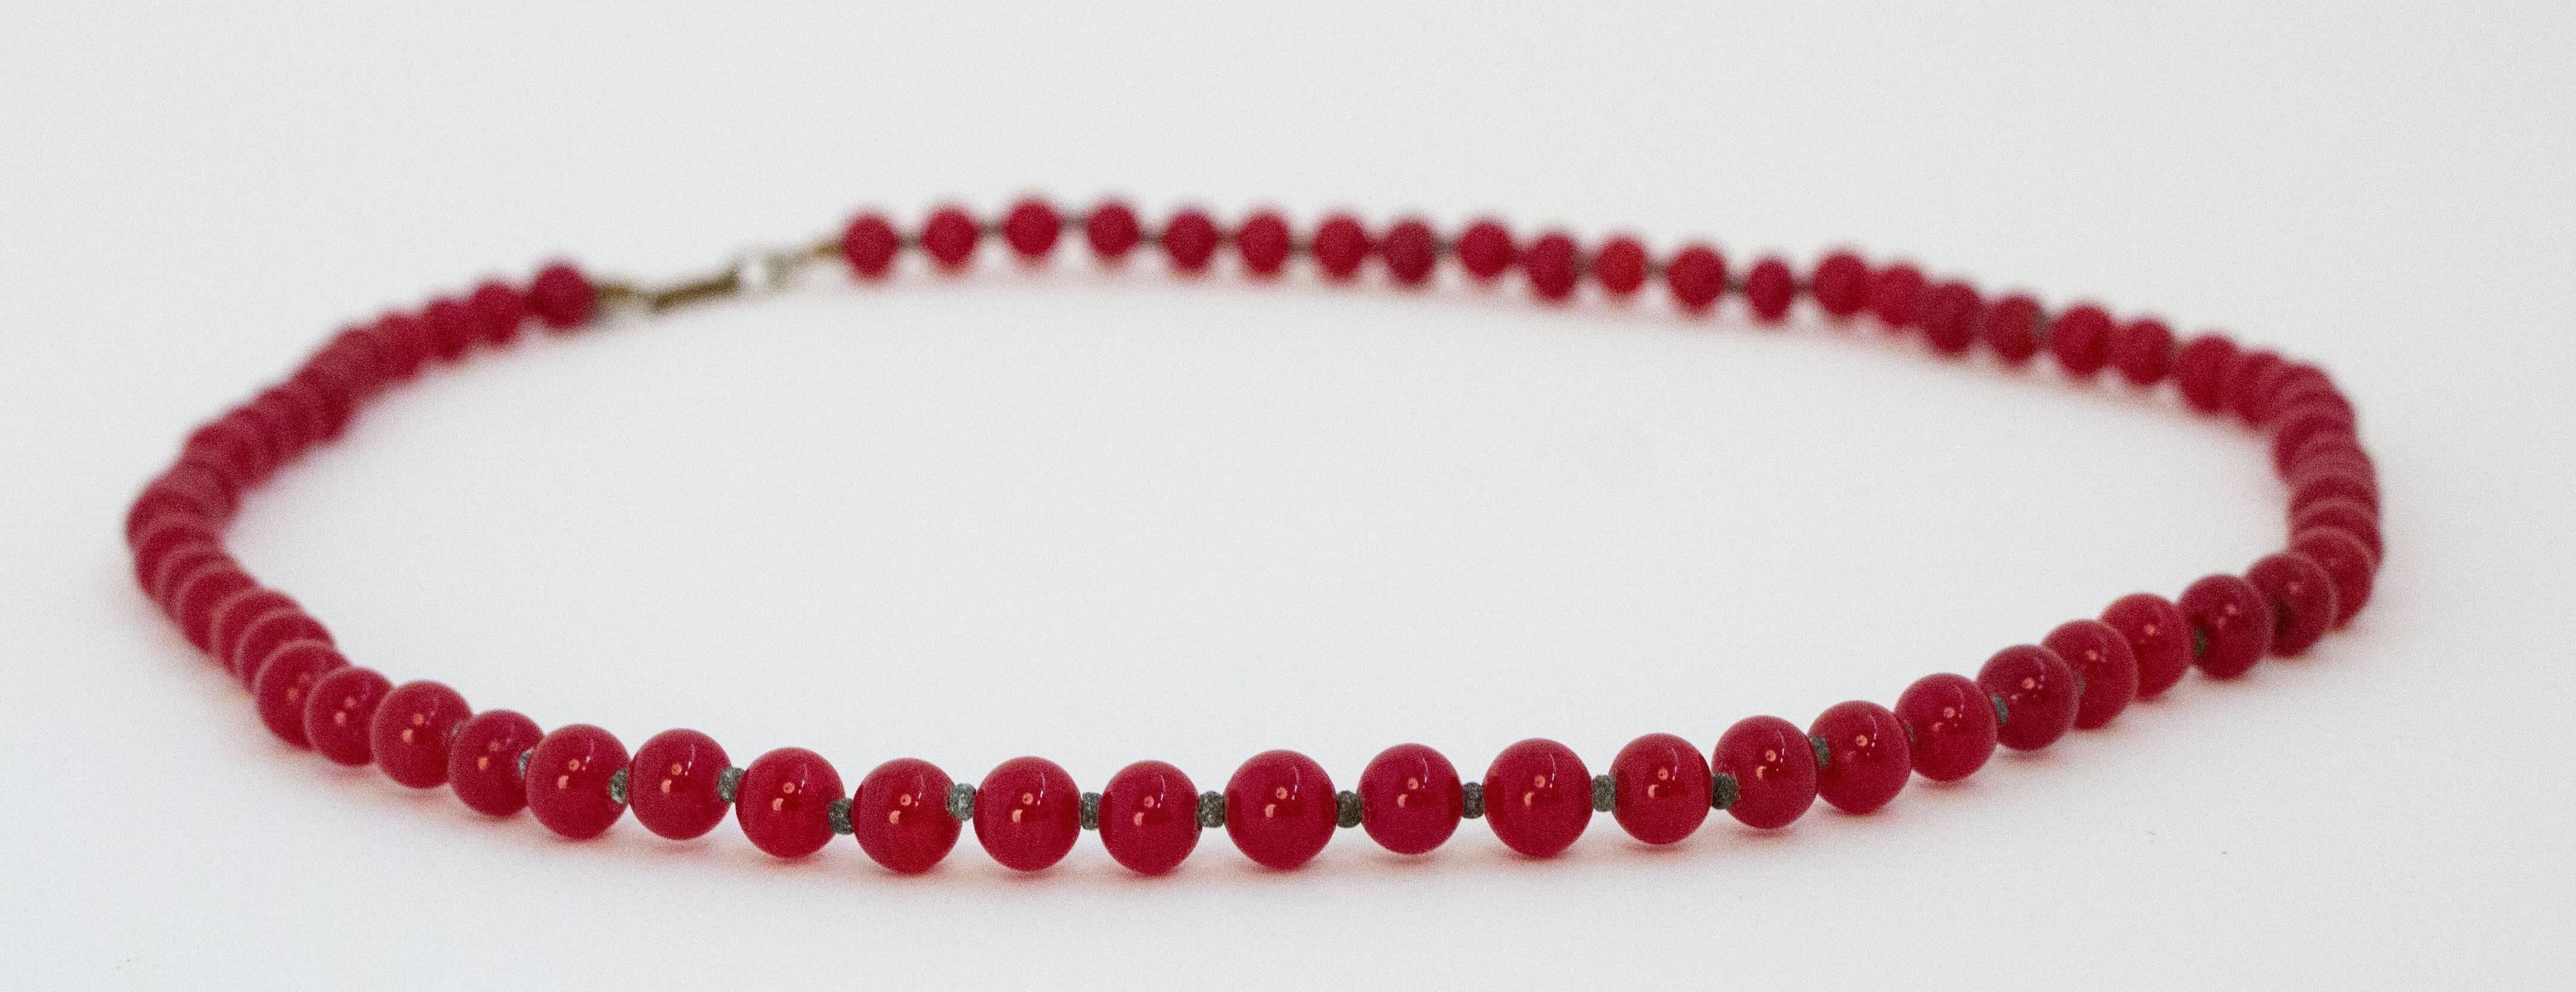 50s Miriam Haskell Red Glass Bead Necklace. Oxidized metal spacers in between the glass beads. 

